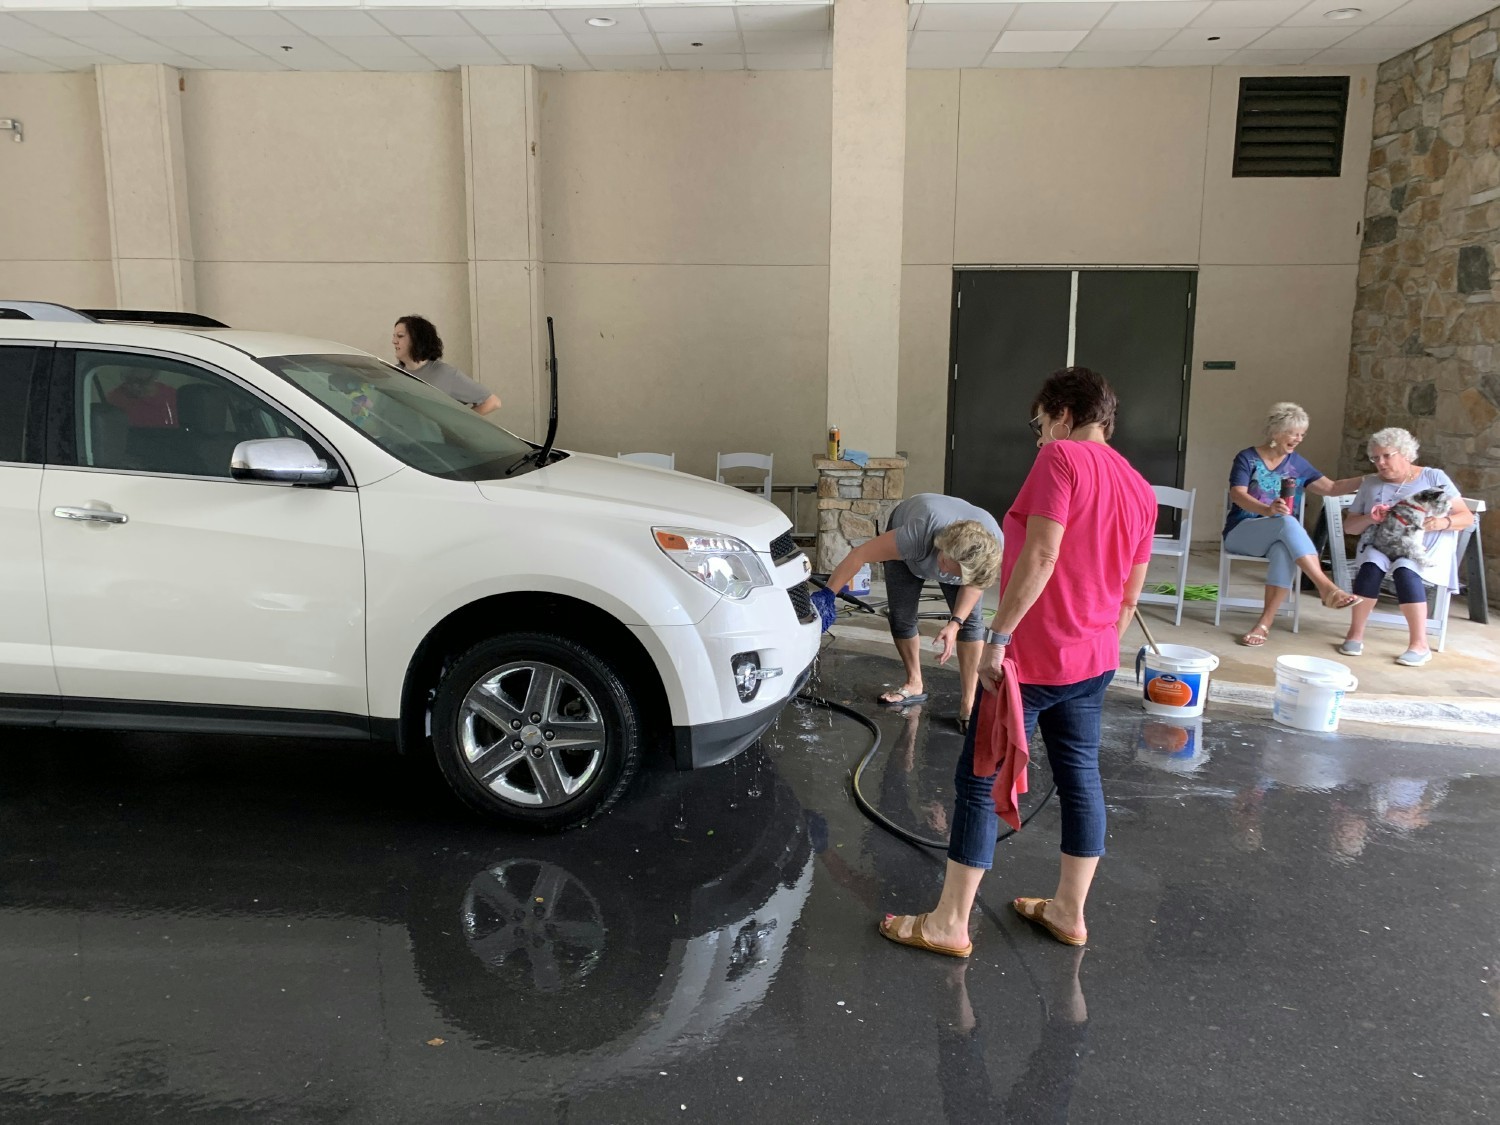 Employee-sponsored Car Wash service for Residents